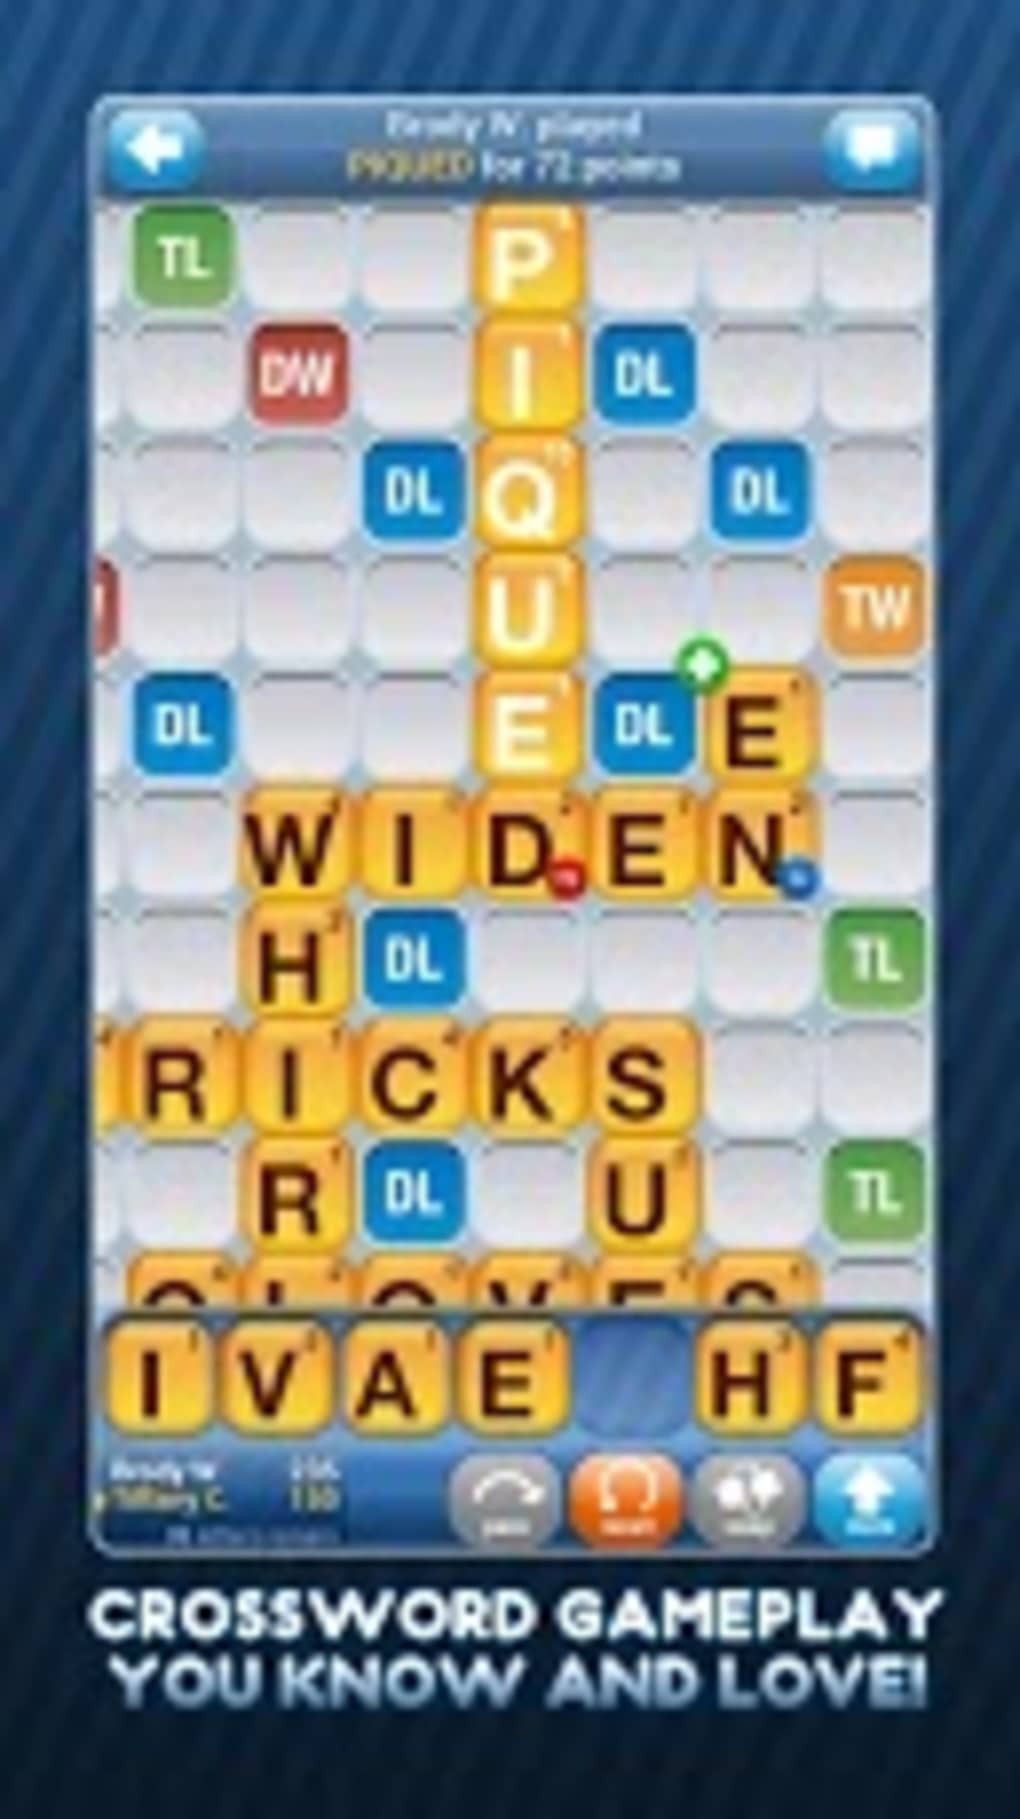 cheats with words with friend